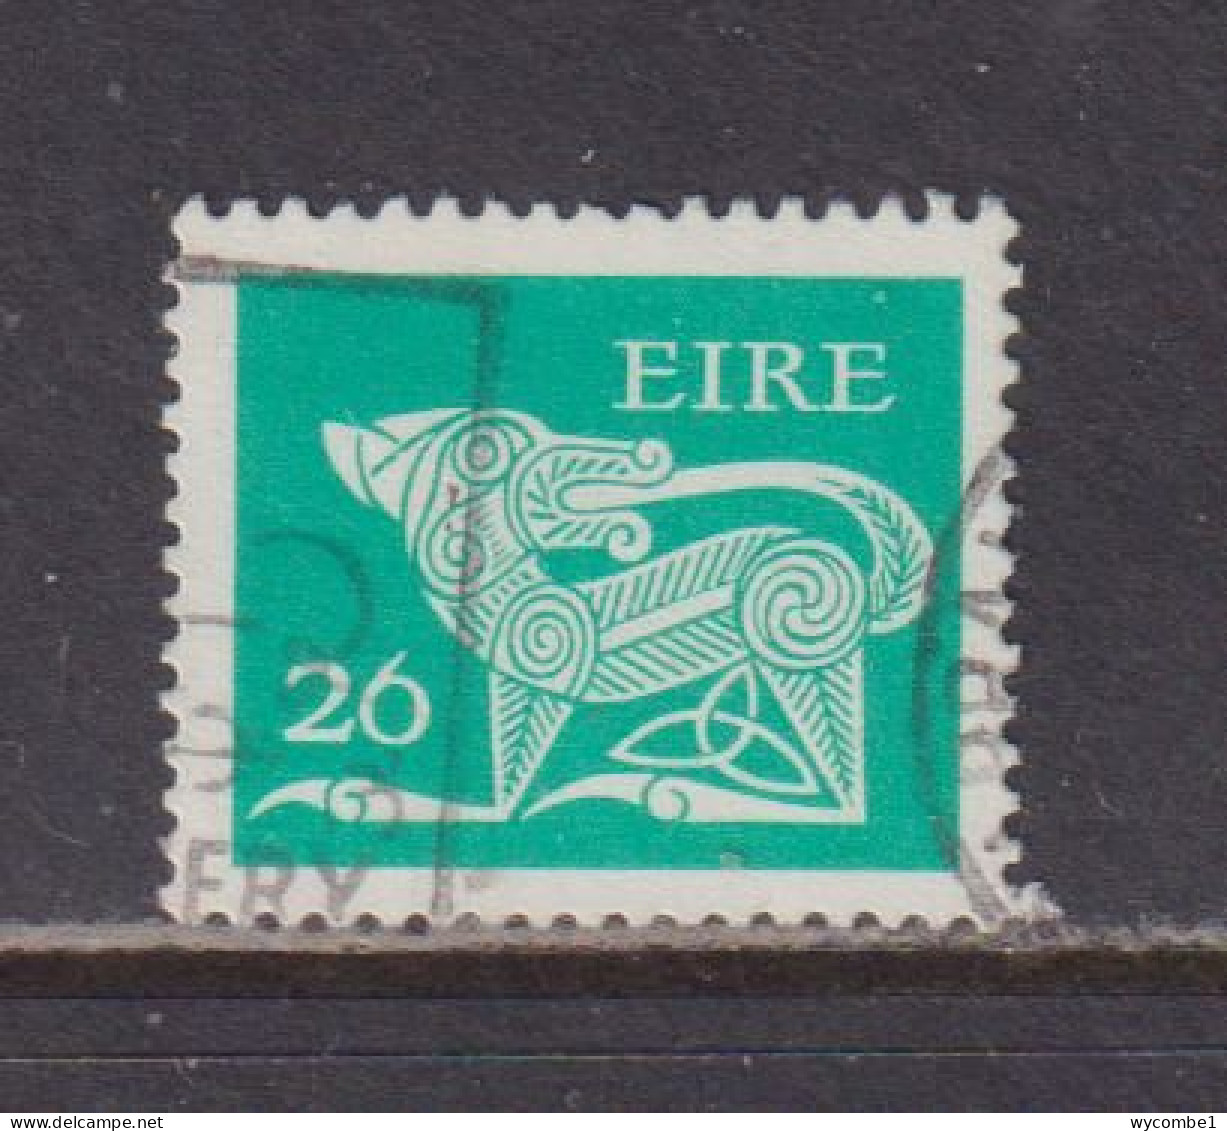 IRELAND - 1971  Decimal Currency Definitives  26p  Used As Scan - Oblitérés